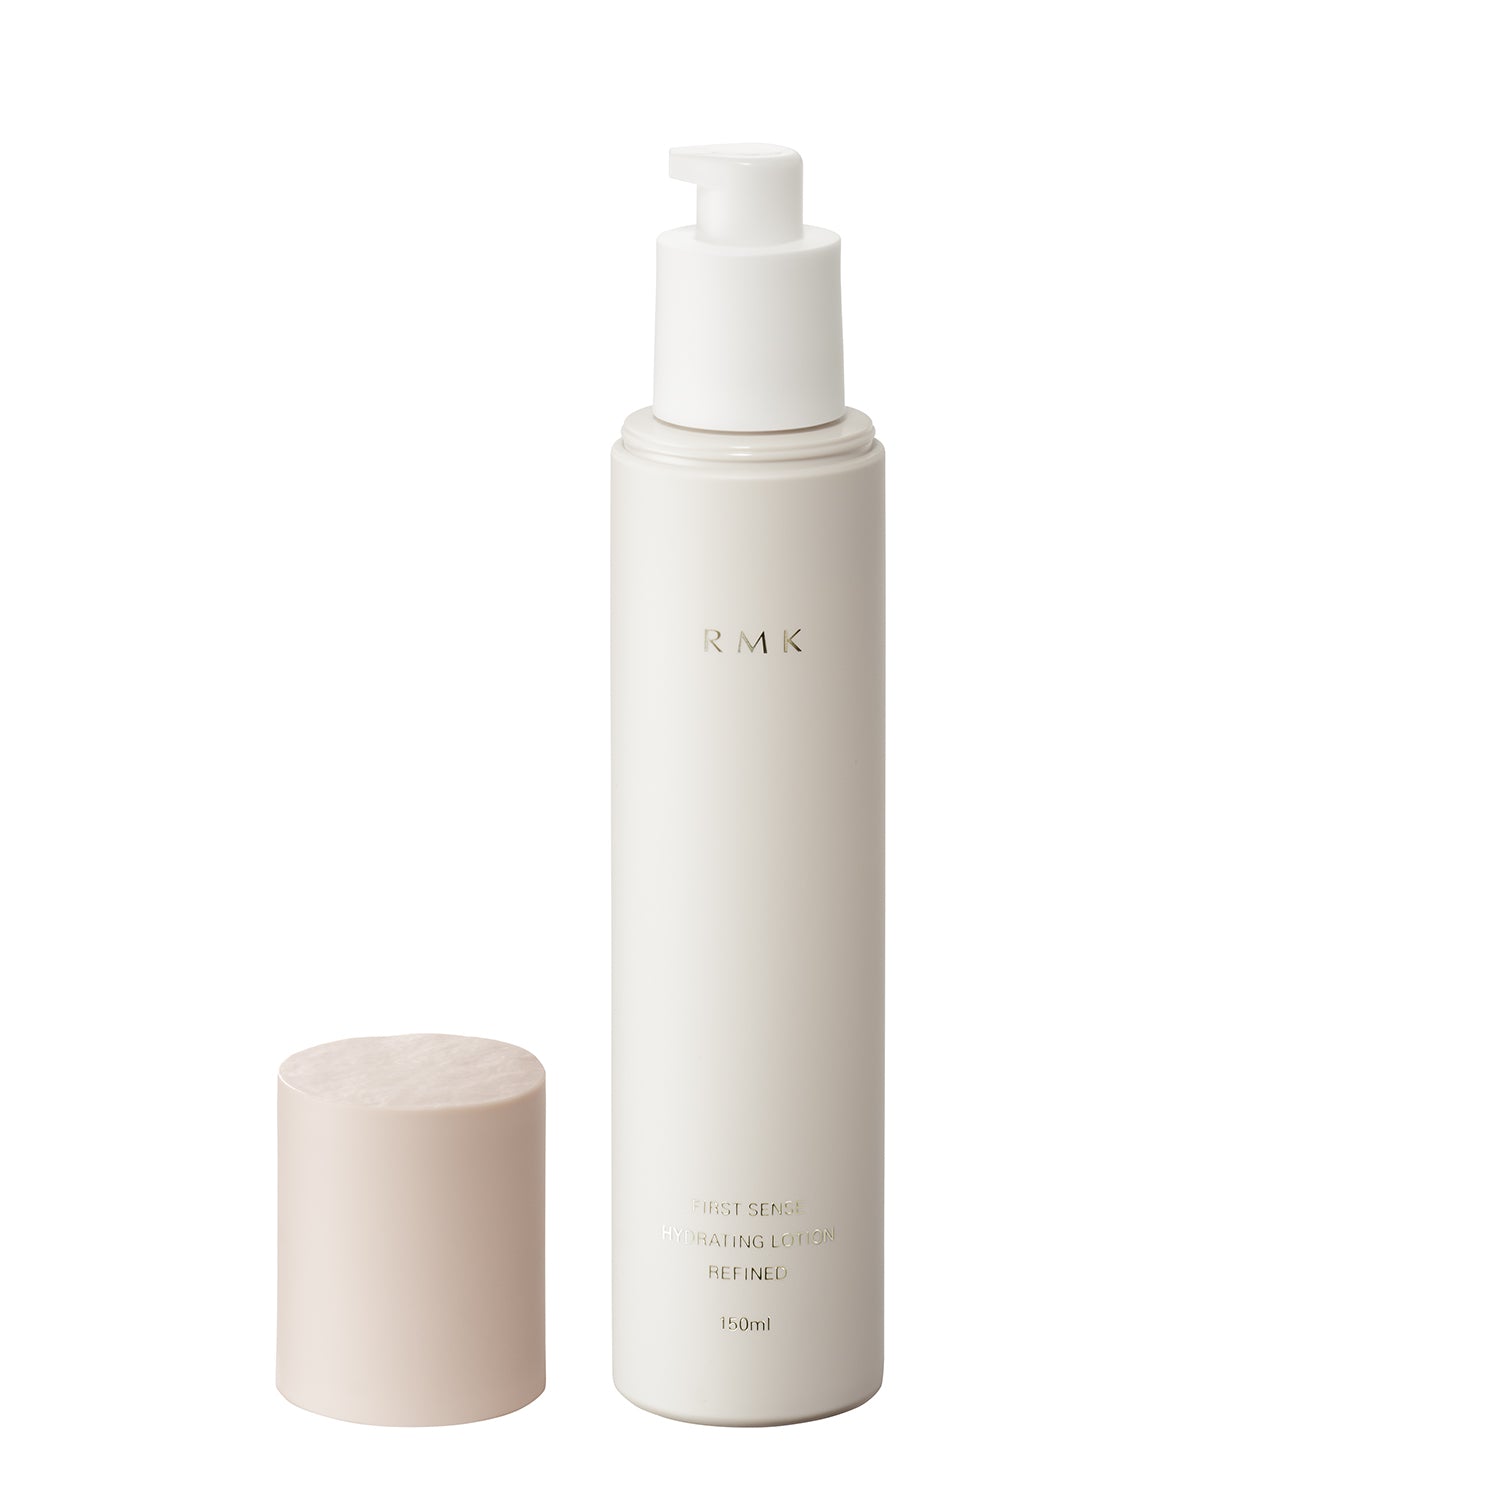 RMK First Sense Hydrating Lotion Refined